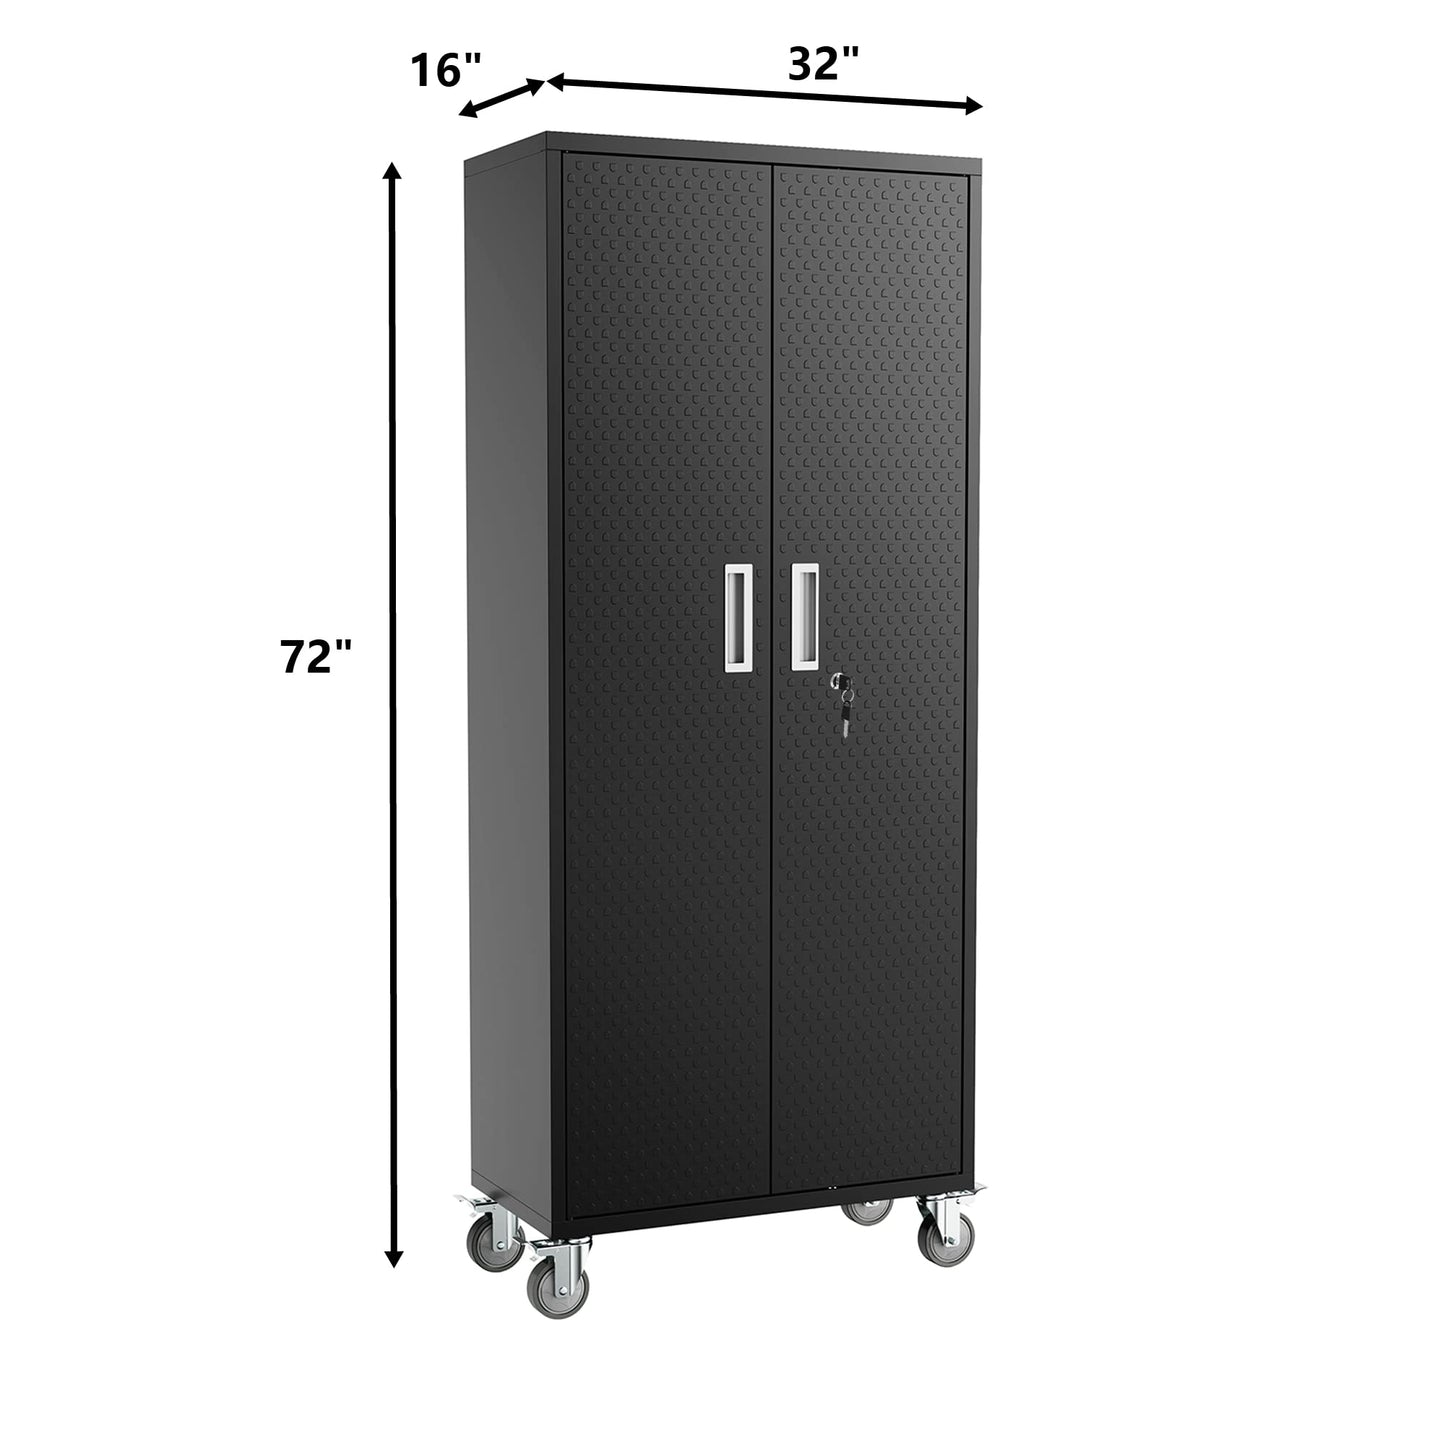 TOPKEY Metal Storage Cabinets Locker for Home Office, 72" Garage Storage Cabinet with Wheels, Lockable Doors and Shelves, Steel Wardrobe Cabinet with